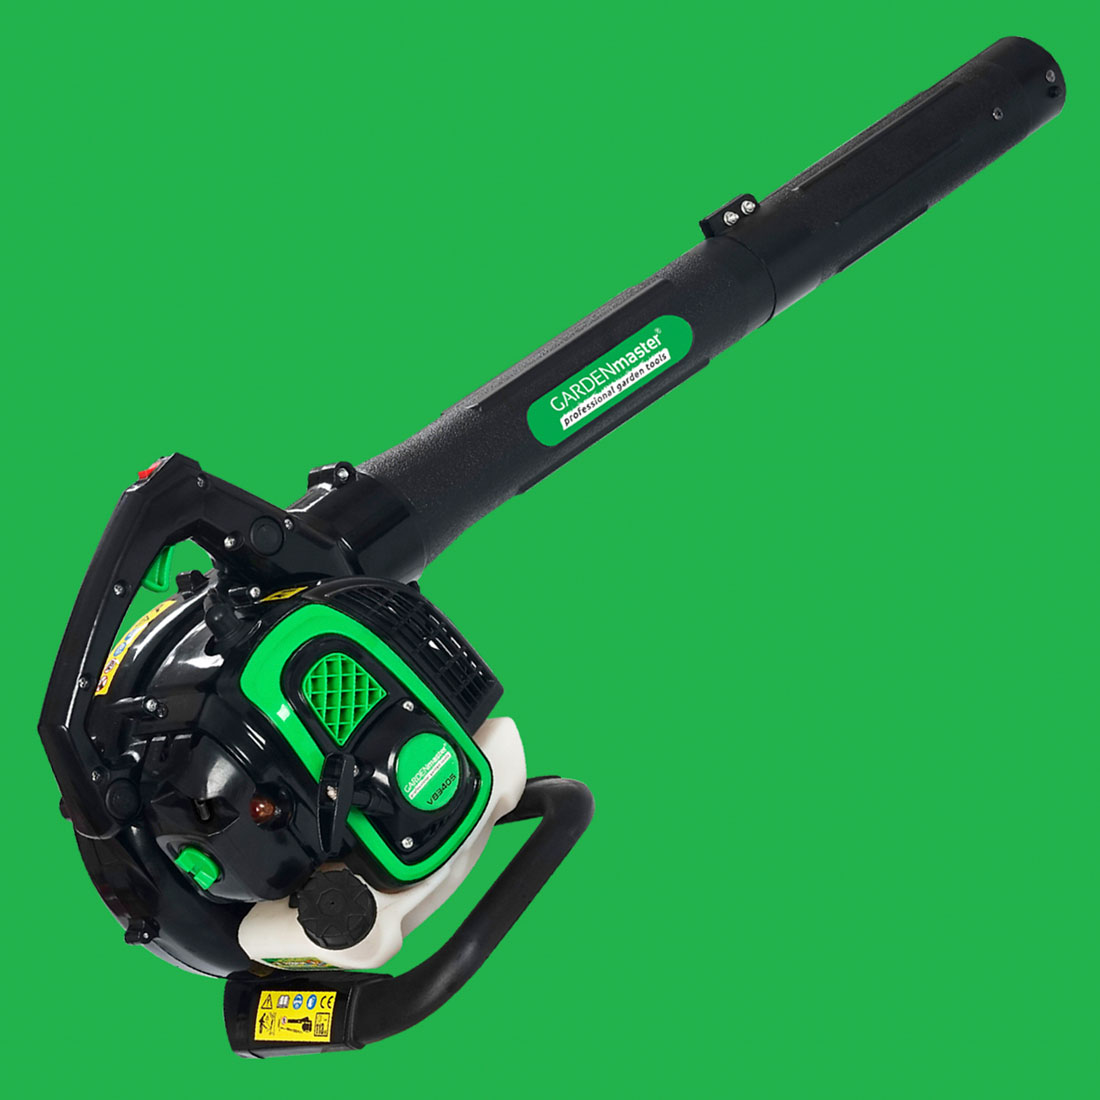 GARDENmaster - Professional Garden Machinery and Tools